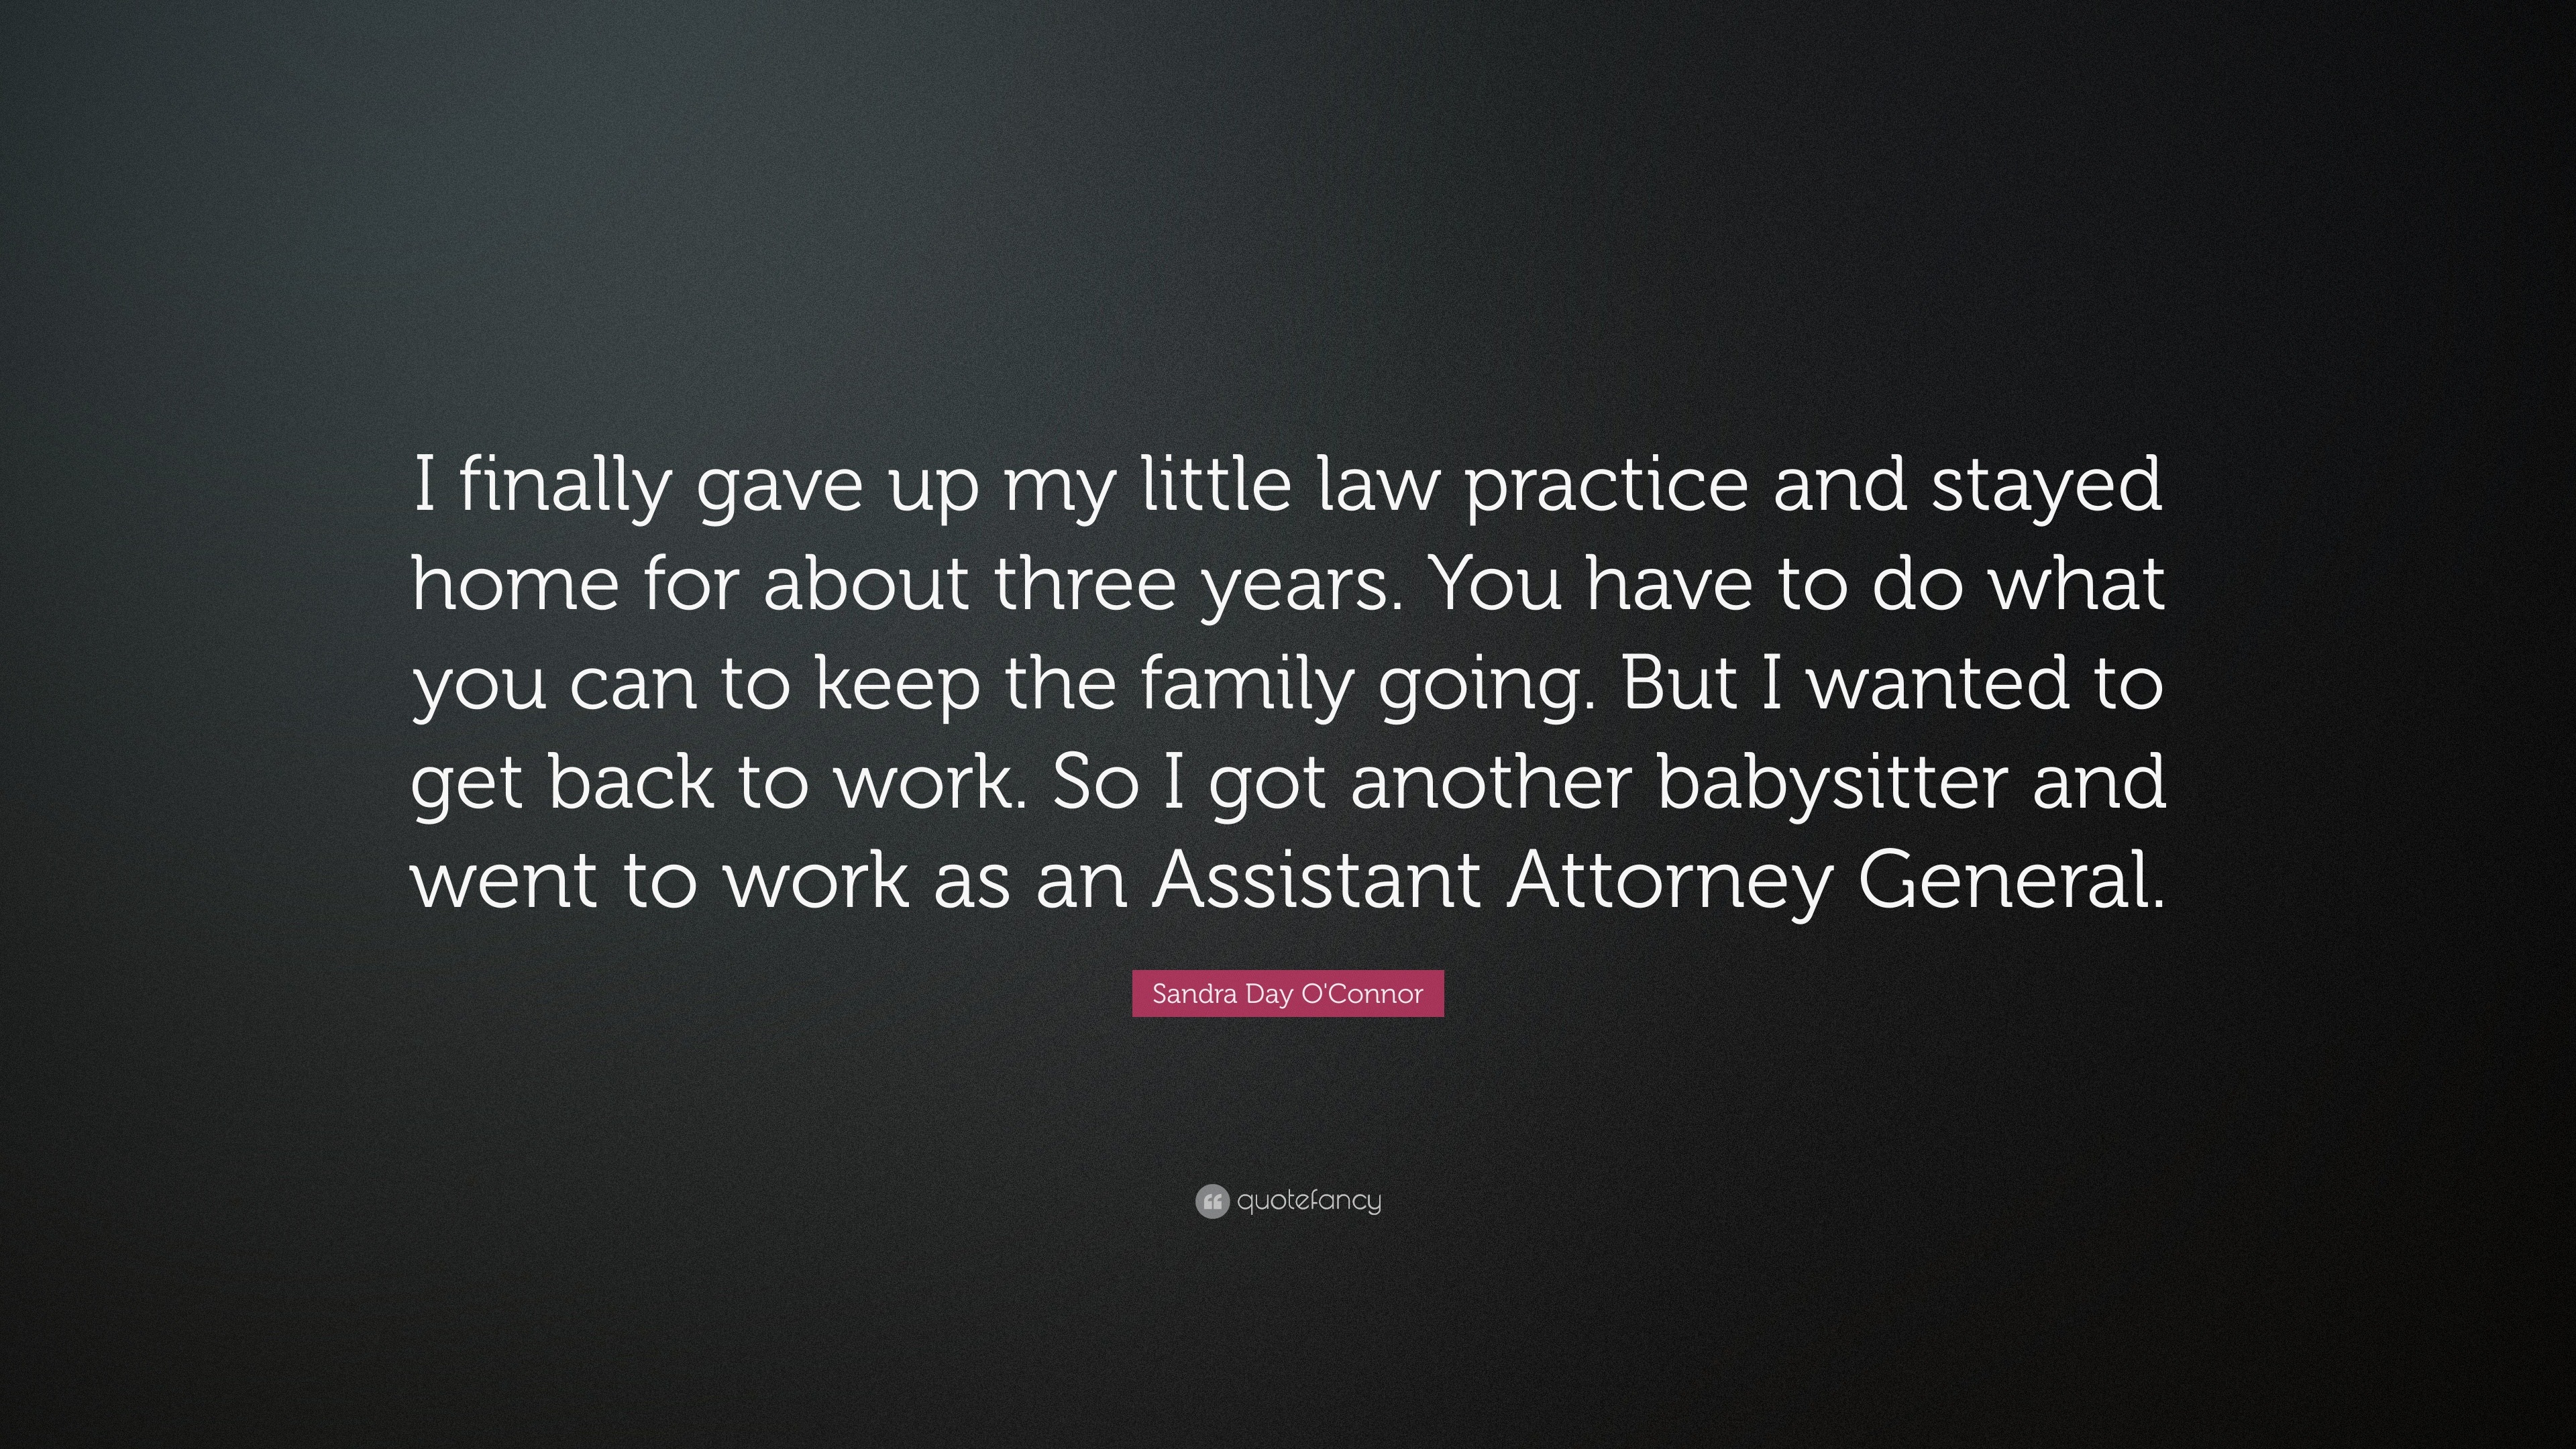 Sandra Day O'connor Quote: “I Finally Gave Up My Little Law Practice And Stayed Home For About Three Years. You Have To Do What You Can To Keep The ...”